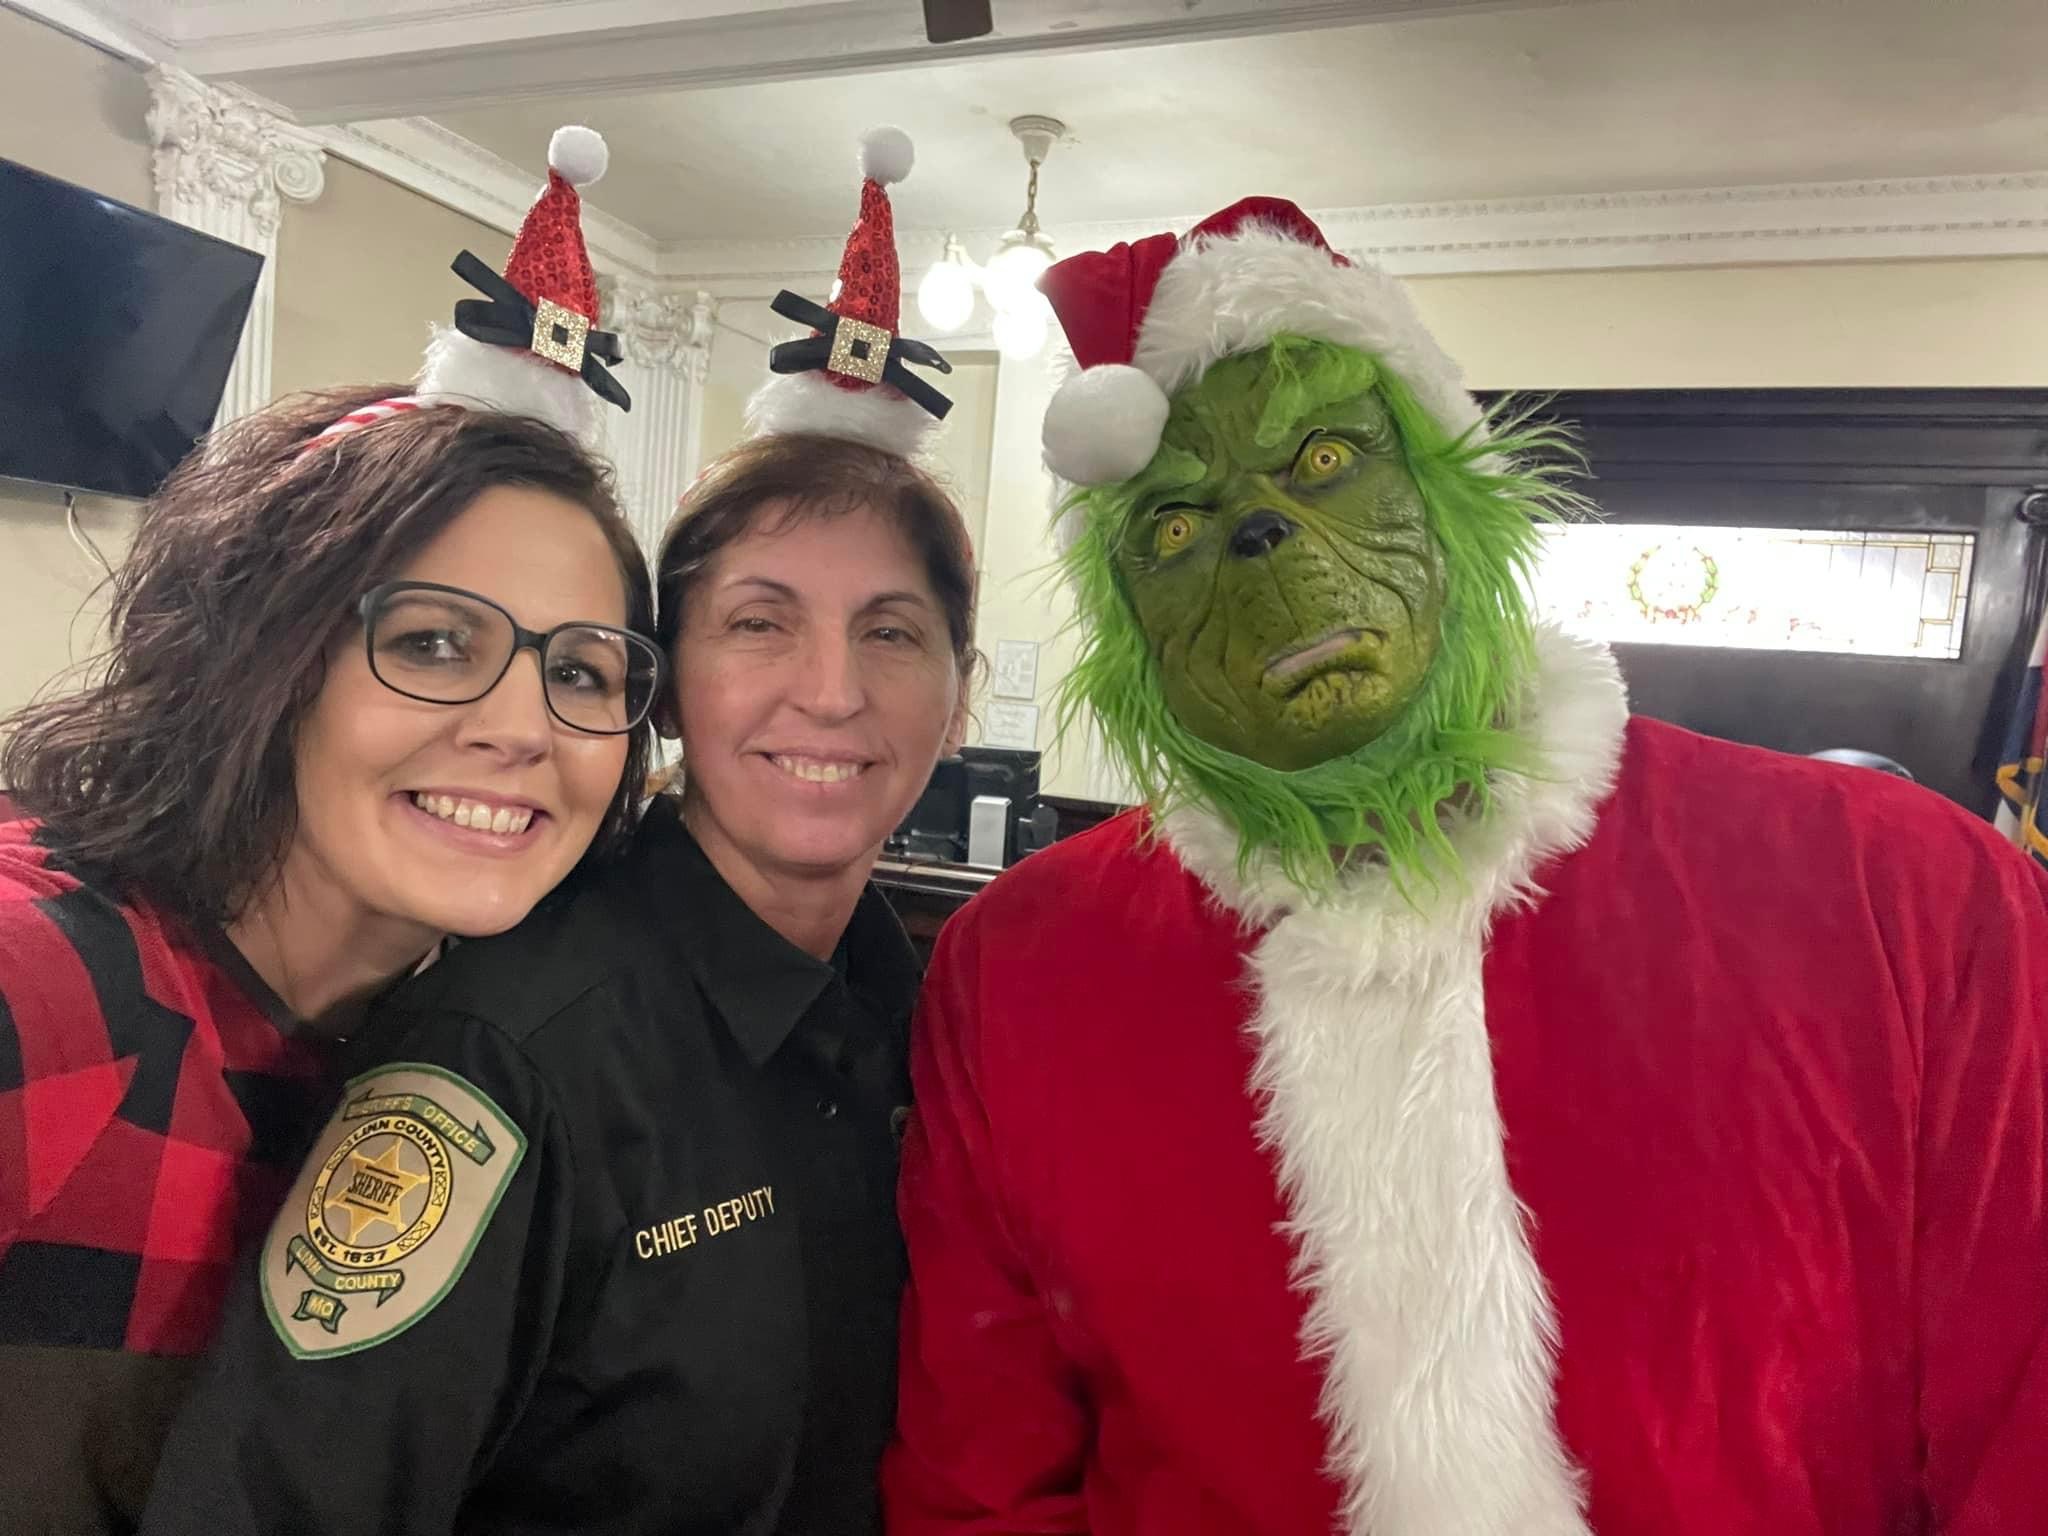 Juvenile Officer Shaunna Stallo, Chief Deputy Melte and the Grinch